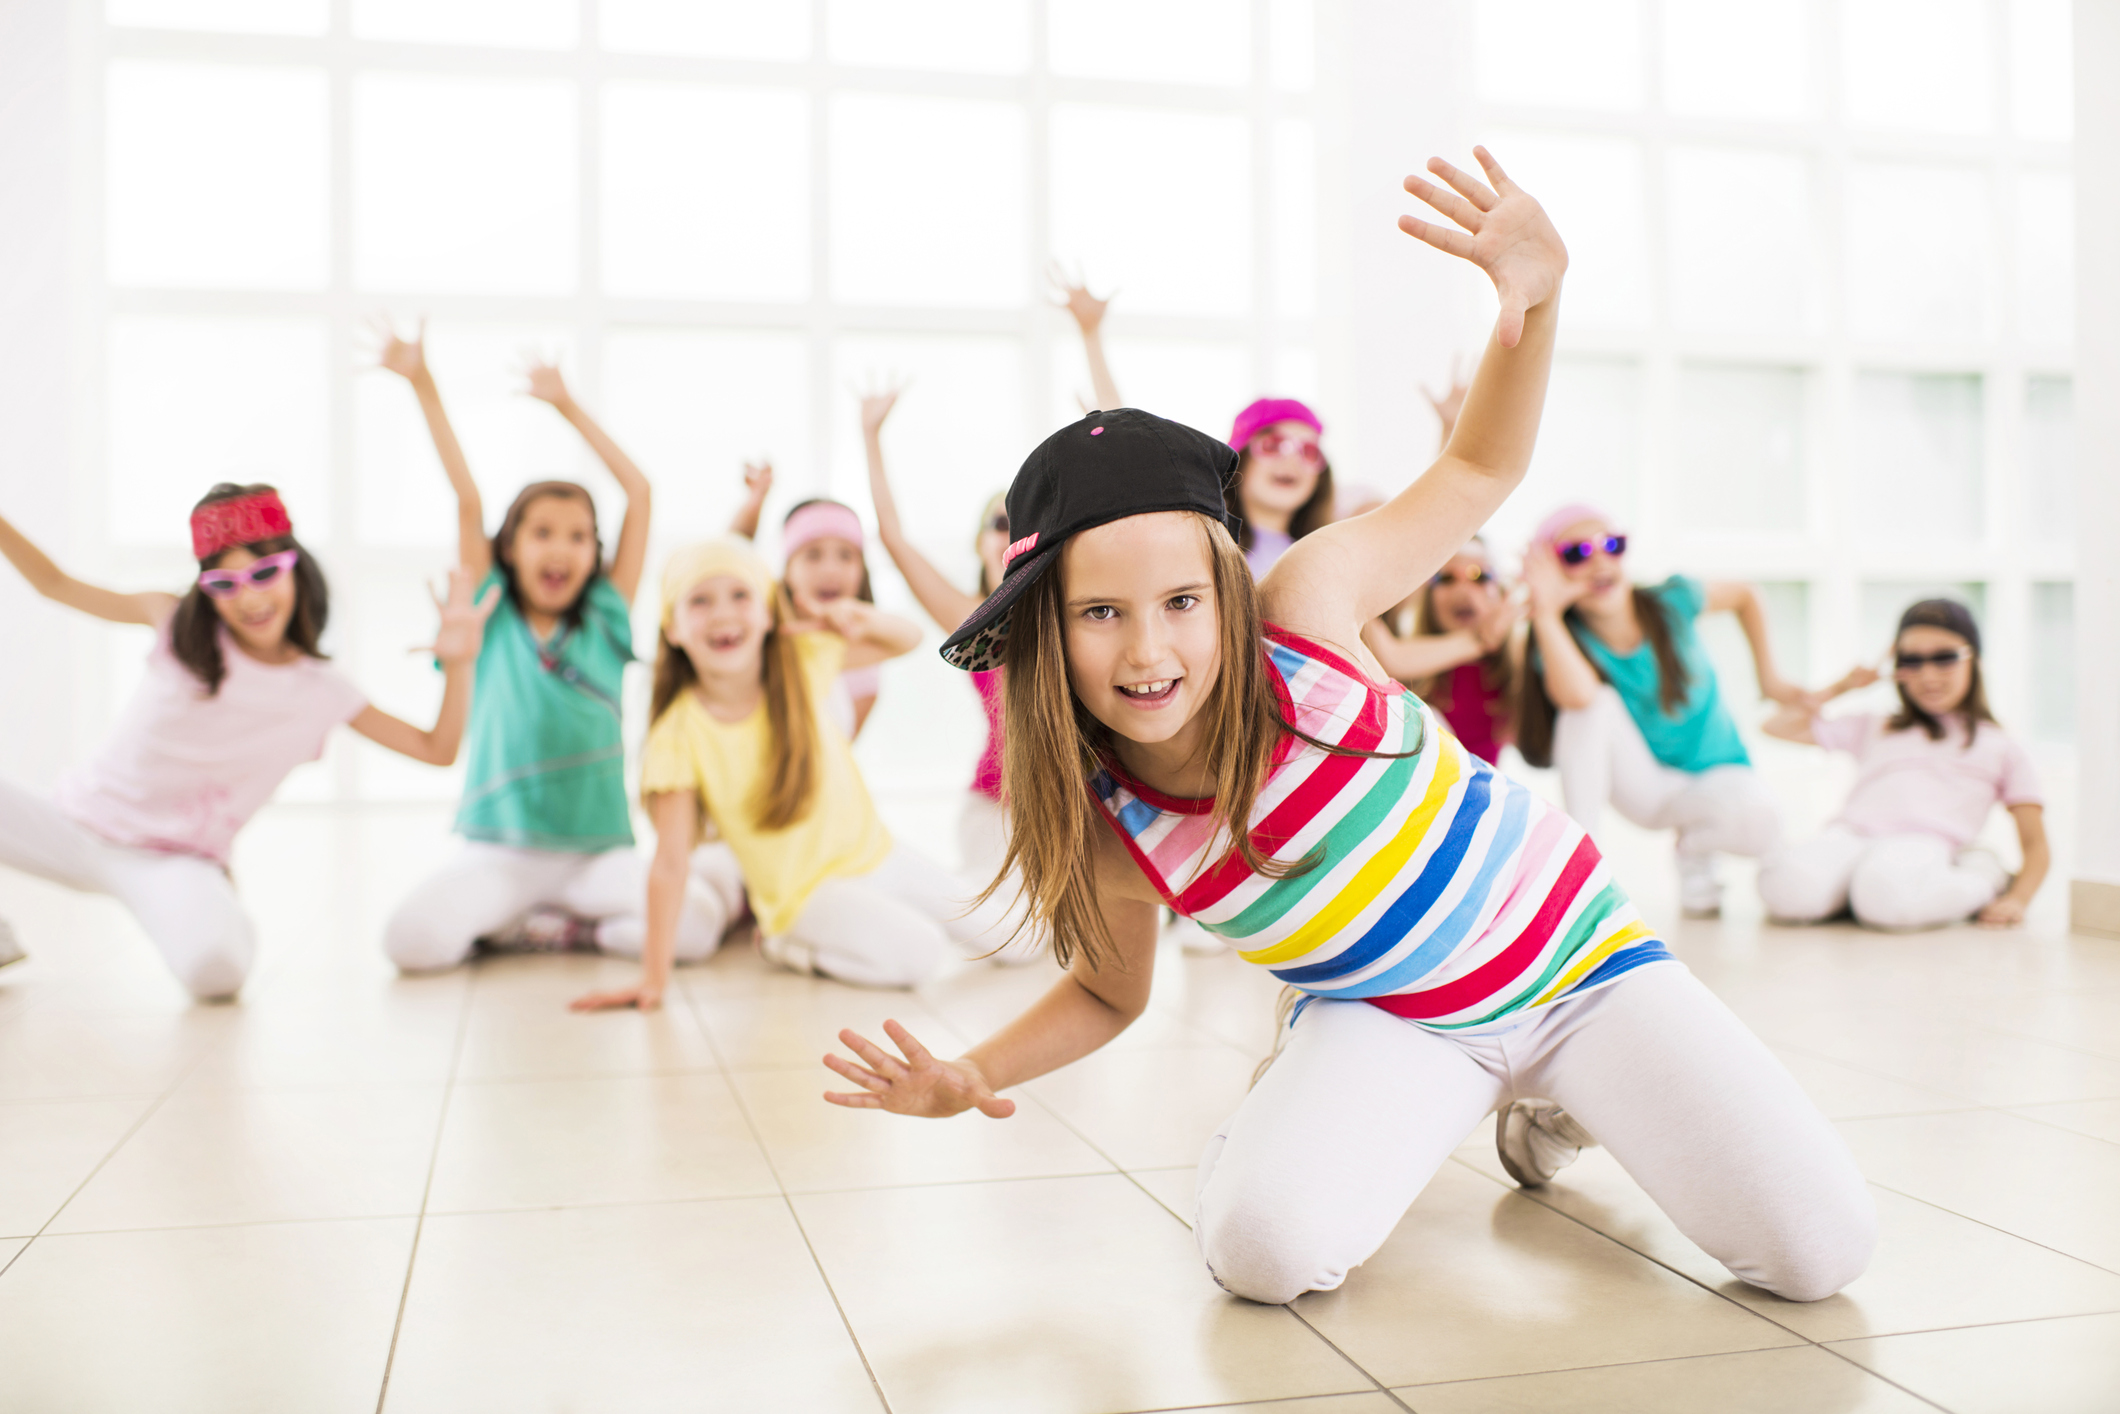 Here's how you can get your kids to dance